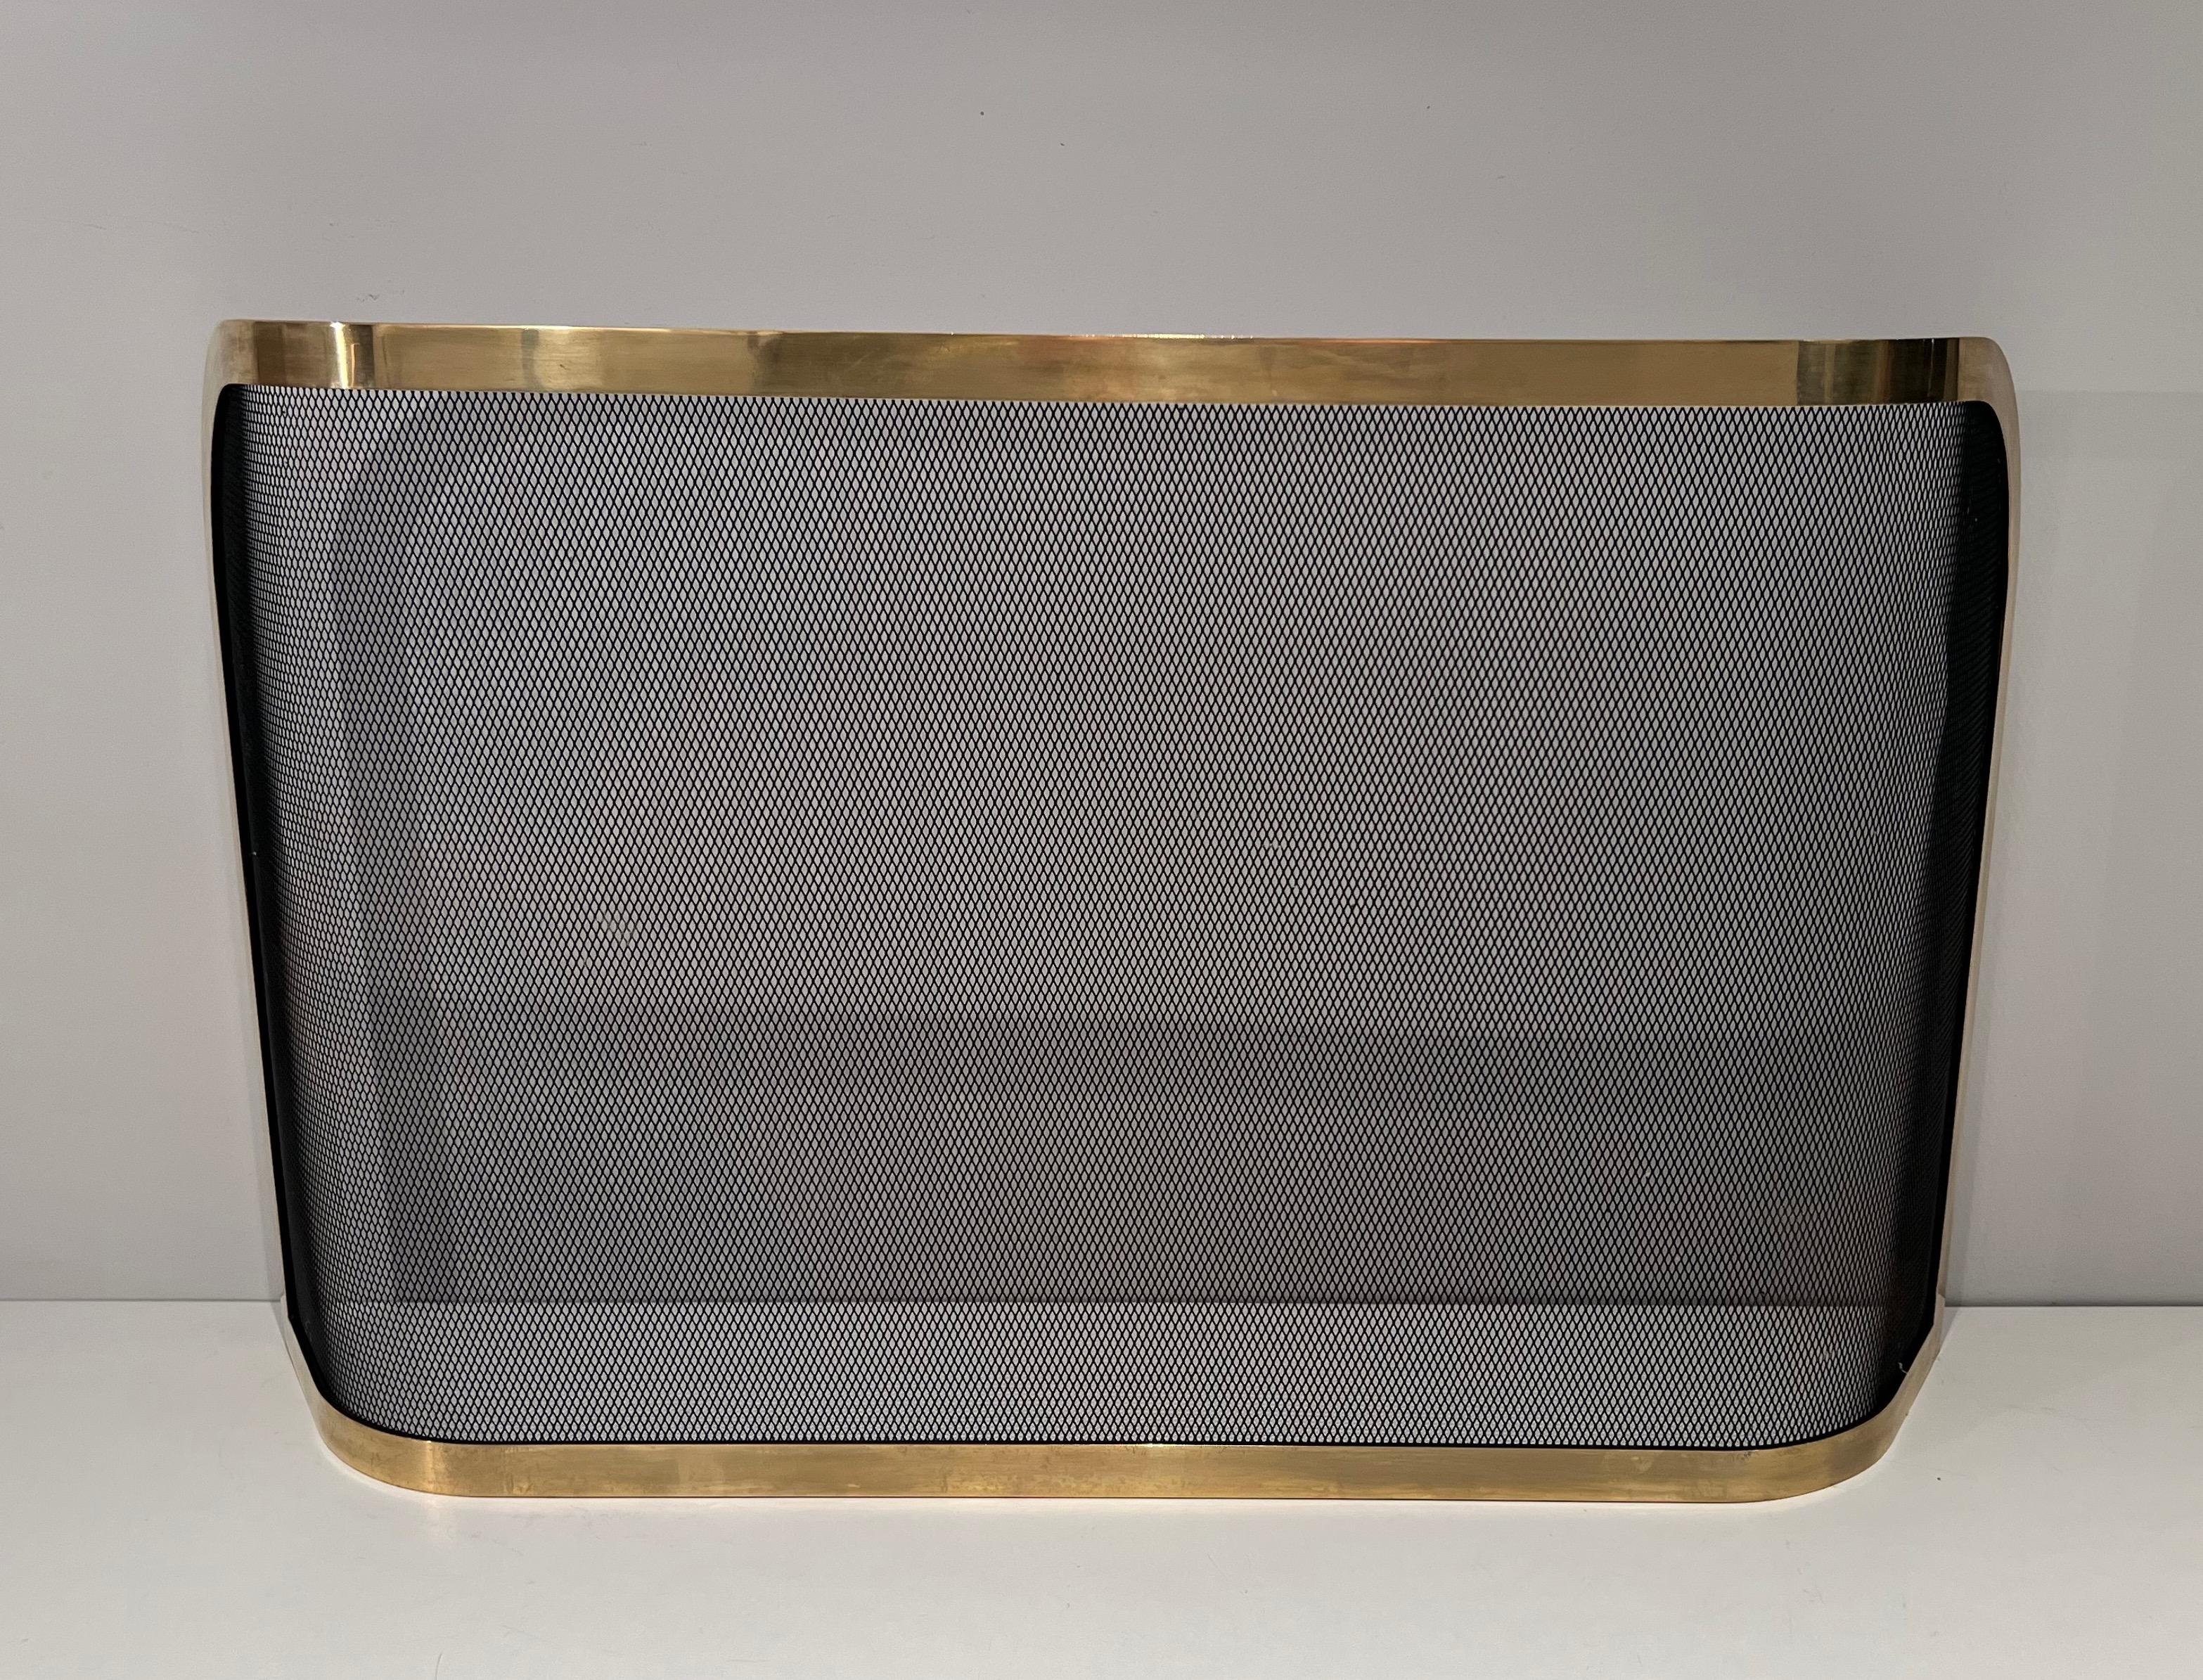 This nice curved fireplace screen is made of brass and grilling. This is a French work. Circa 1970.